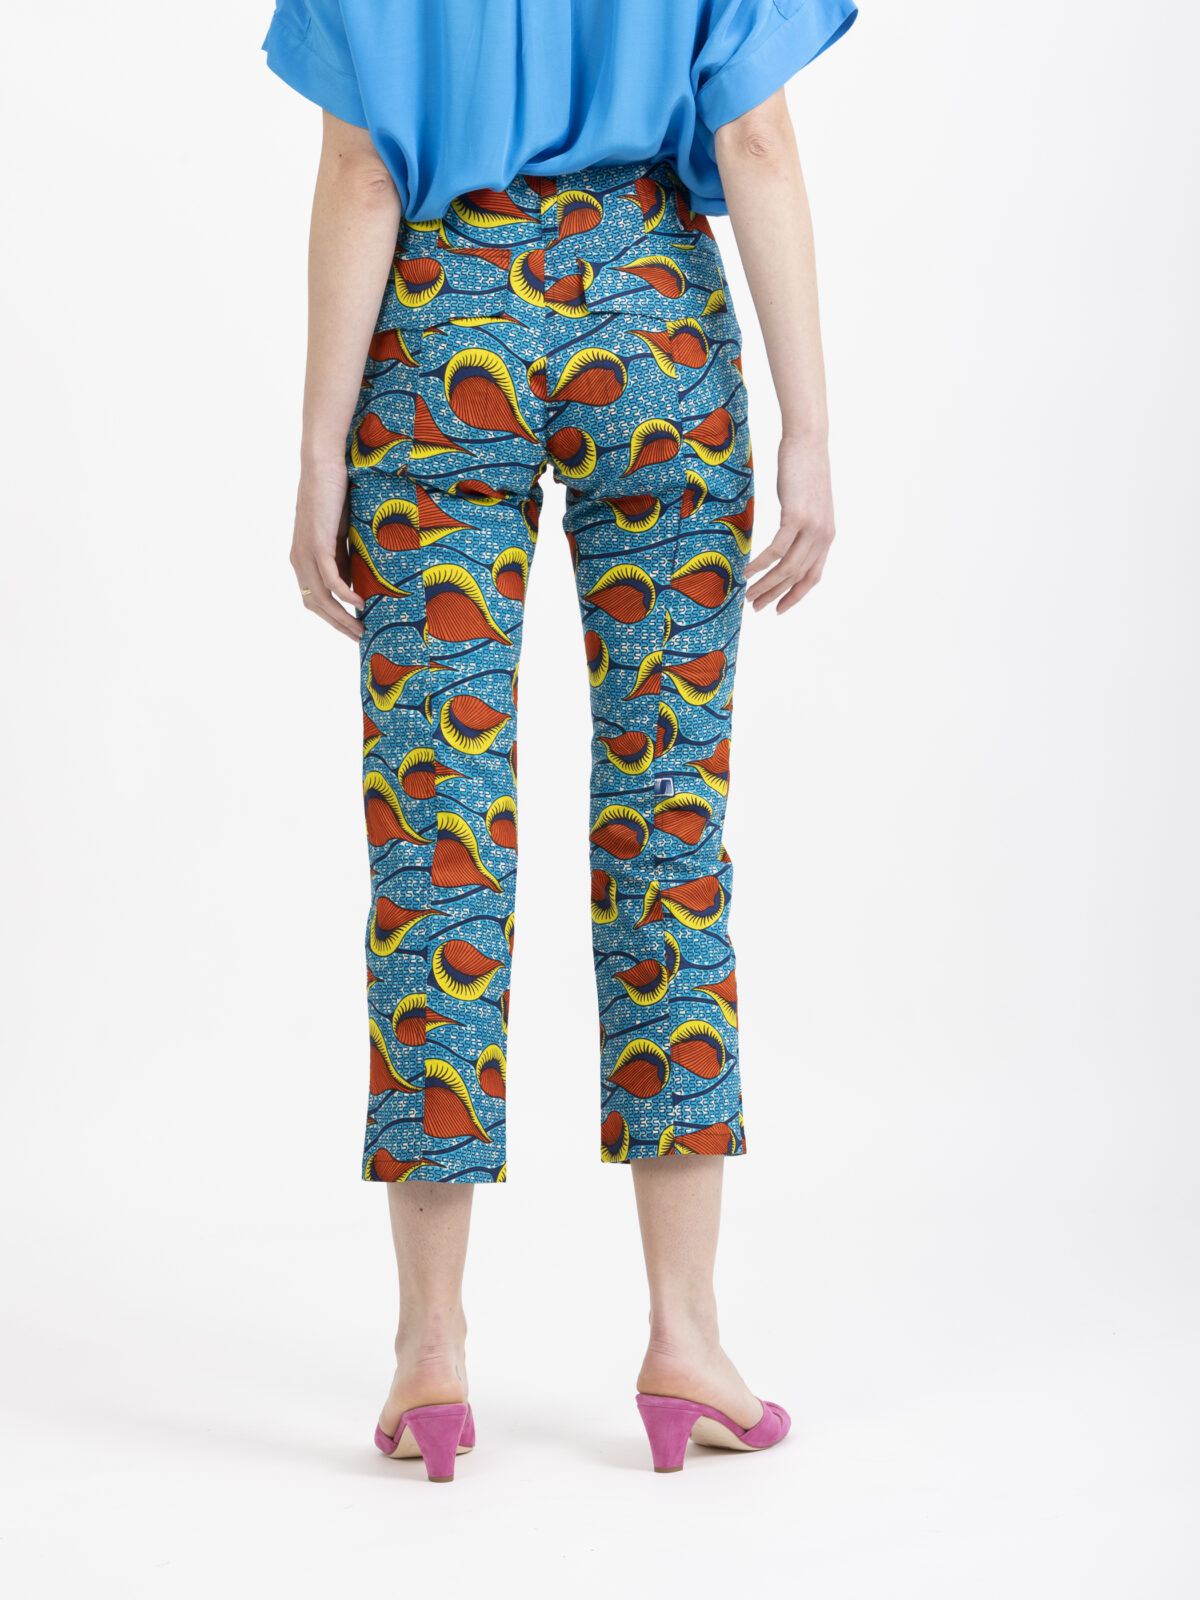 MILLY-VOODOO-LILLY-PANTS-AFRICAN-WAX-COTTON-GREEK-DESIGNERS-KIMALE-MATCHBOXATHENS